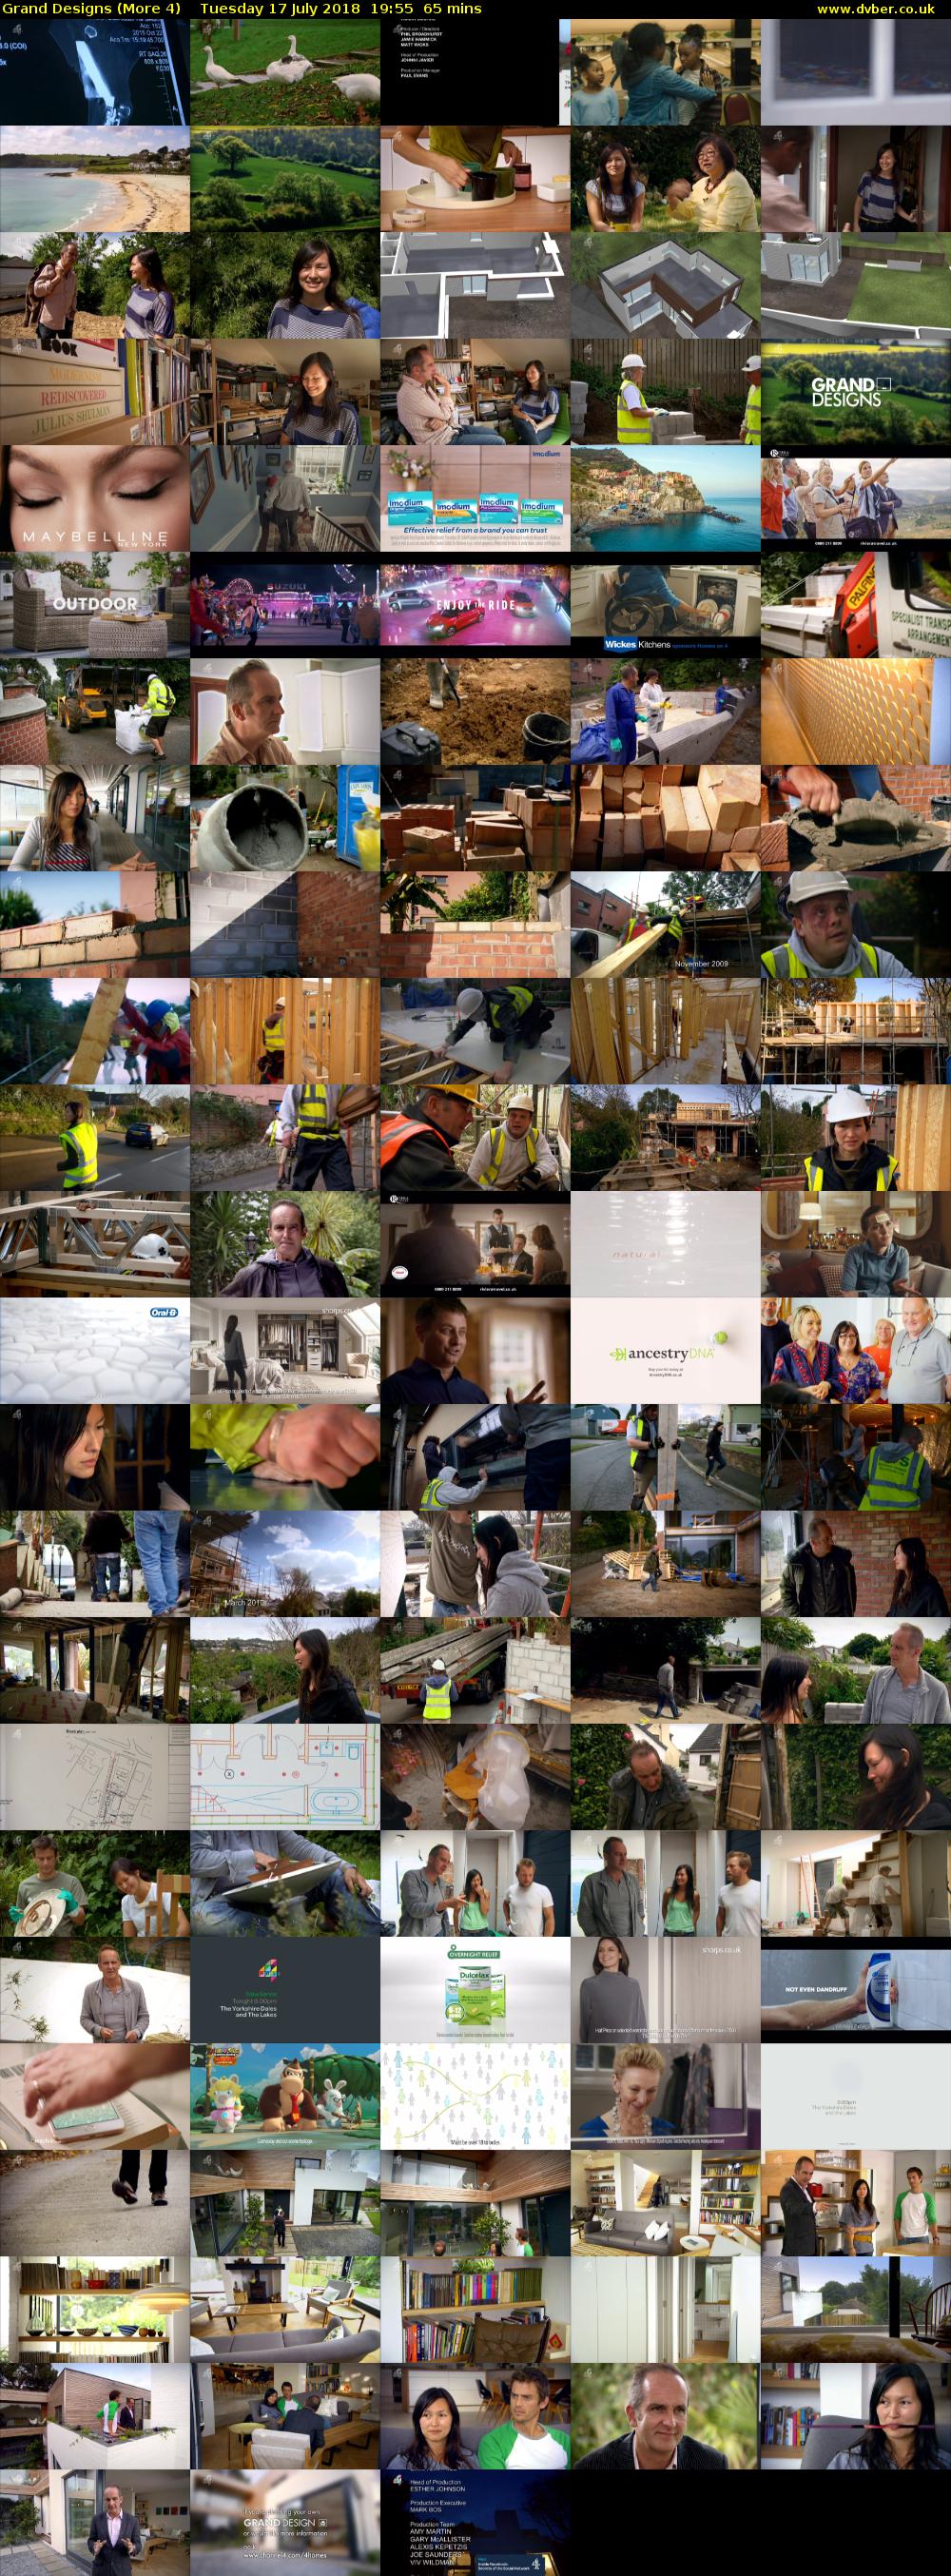 Grand Designs (More 4) Tuesday 17 July 2018 19:55 - 21:00